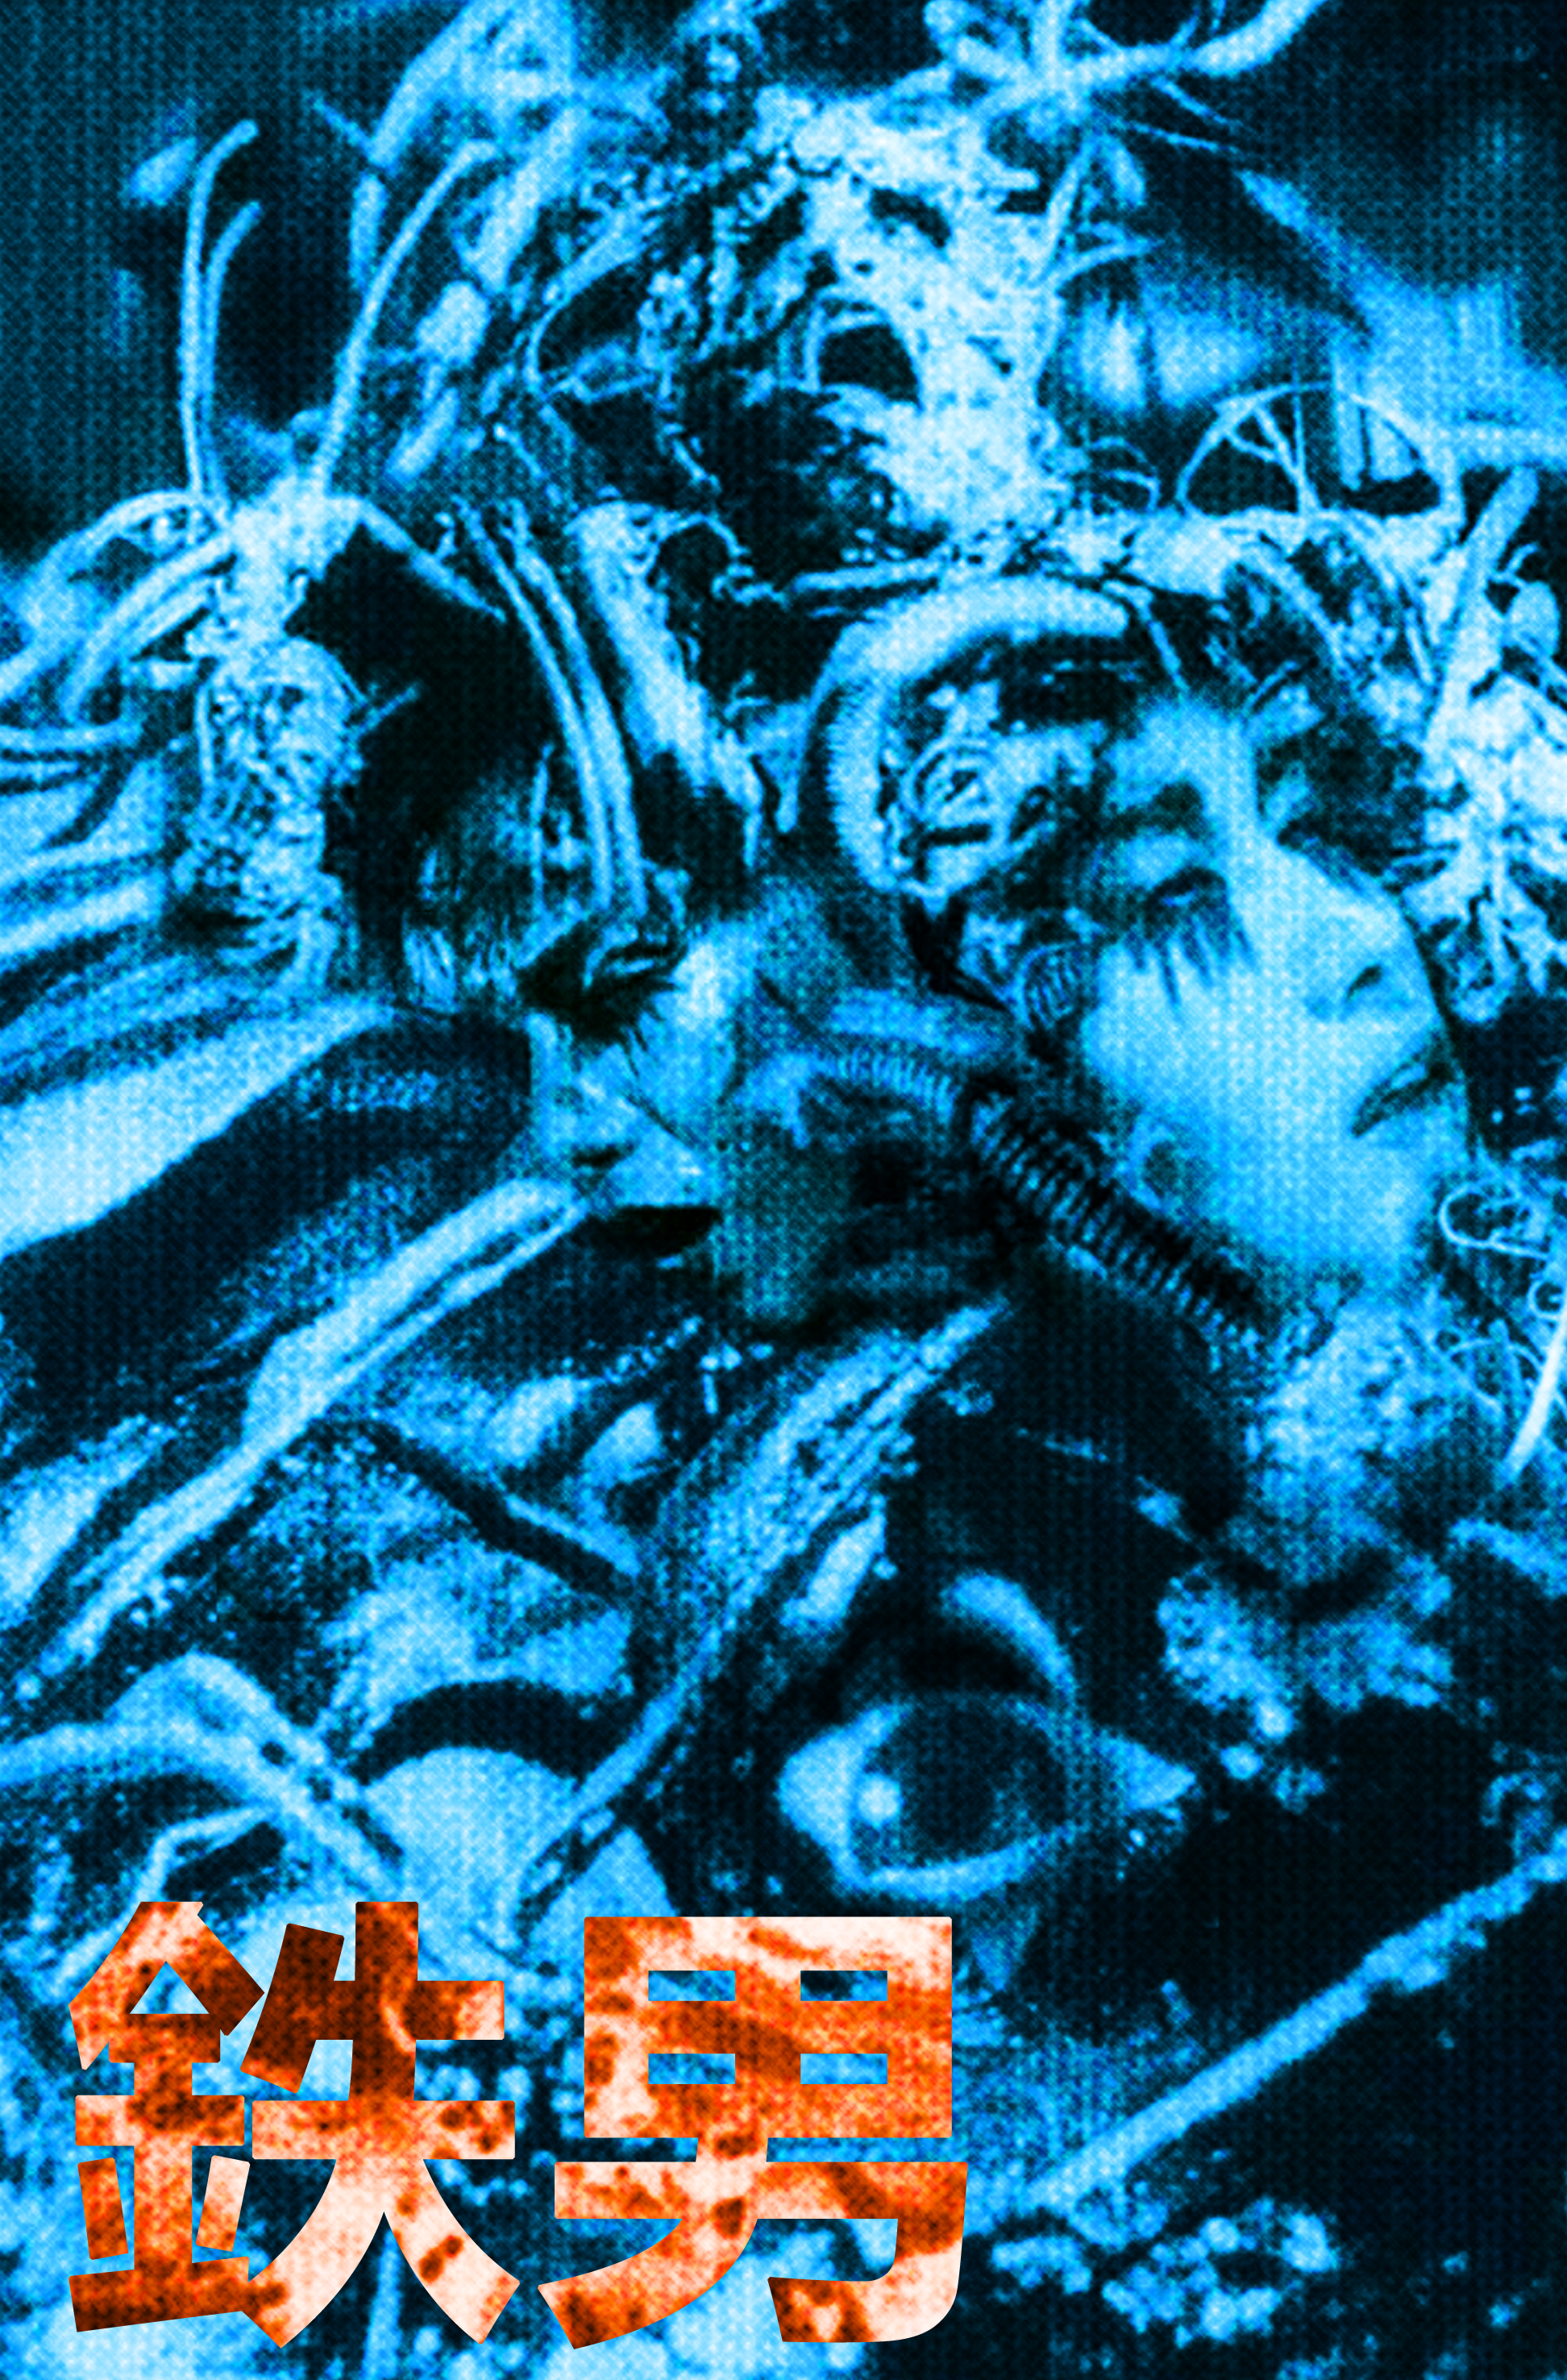 Tetsuo the Iron Man (1989) HD Wallpaper From Gallsource.com. Iron man, Movie posters, Man